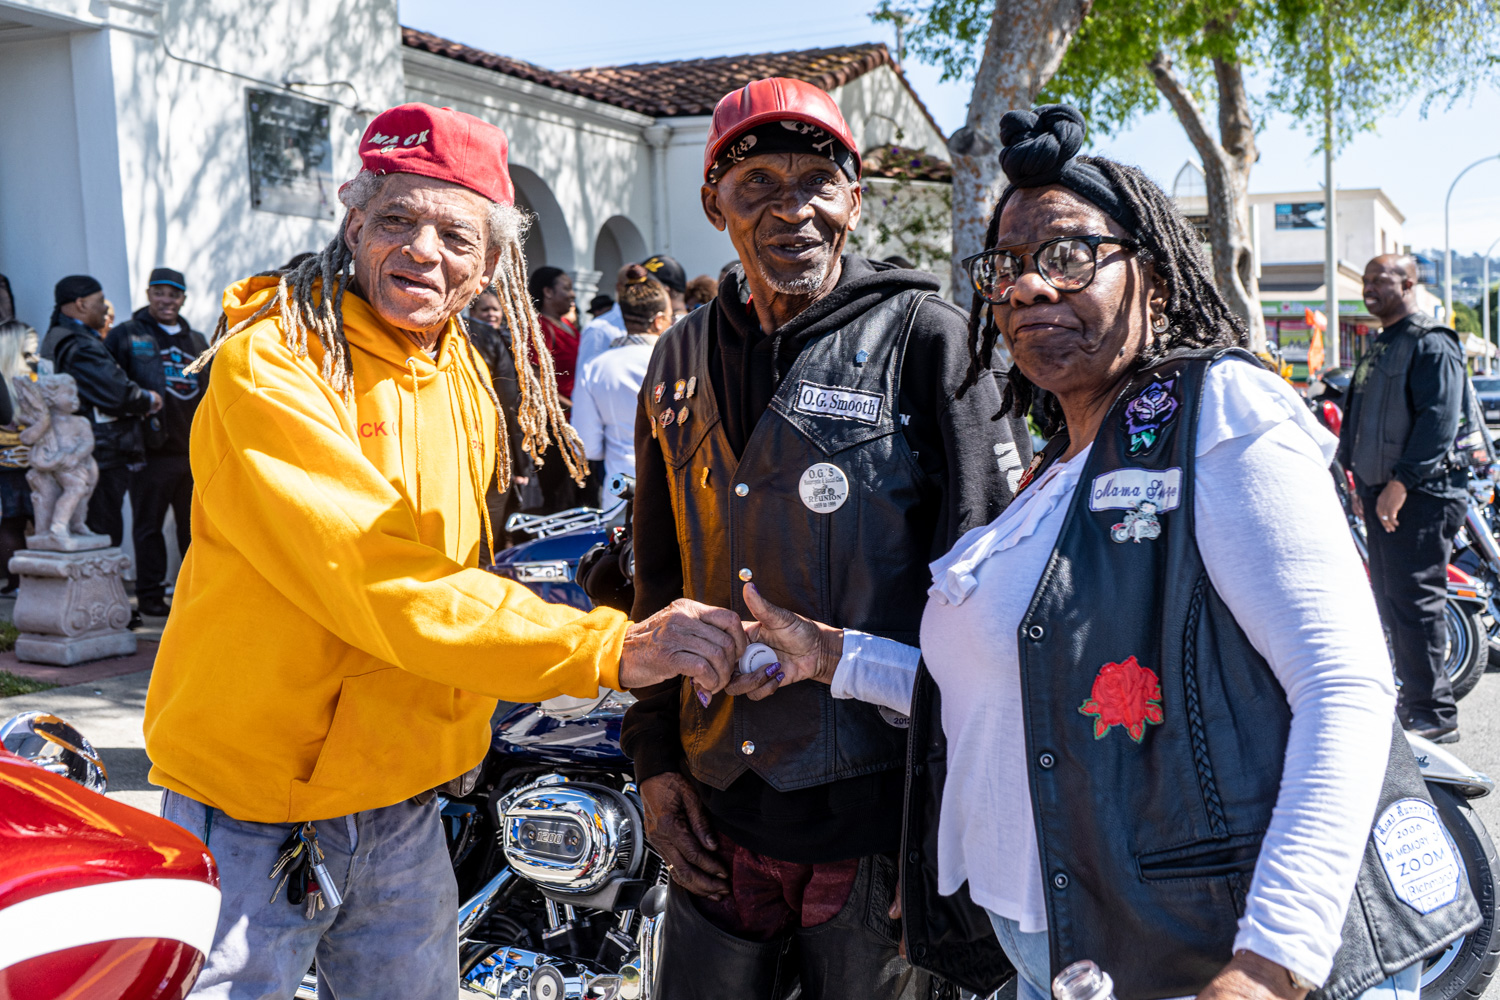 March 11, 2020: Members of Bay Area motorcycle clubs at a memorial service for their friend Spiderman, Stewart’s Rose Manor Funeral Service, 3331 Macdonald Avenue, Richmond, California. © Camilo José Vergara